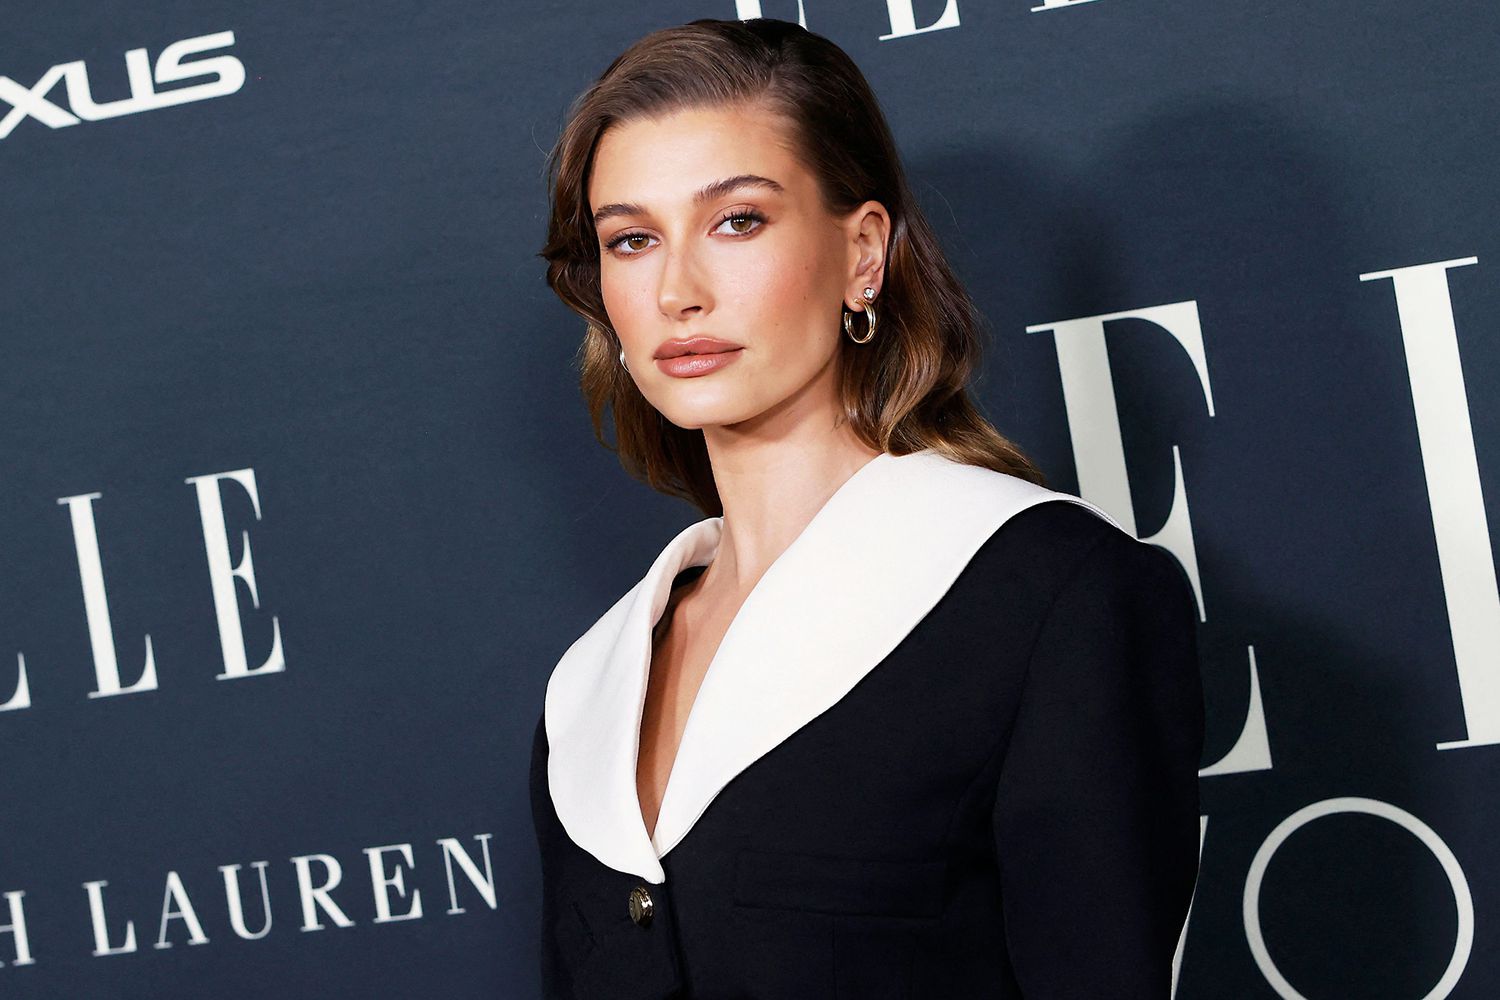 Hailey Bieber arrives to attend ELLE's 27th Annual Women In Hollywood Celebration at the Academy Museum of Motion Pictures on October 19, 2021 in Los Angeles, California.